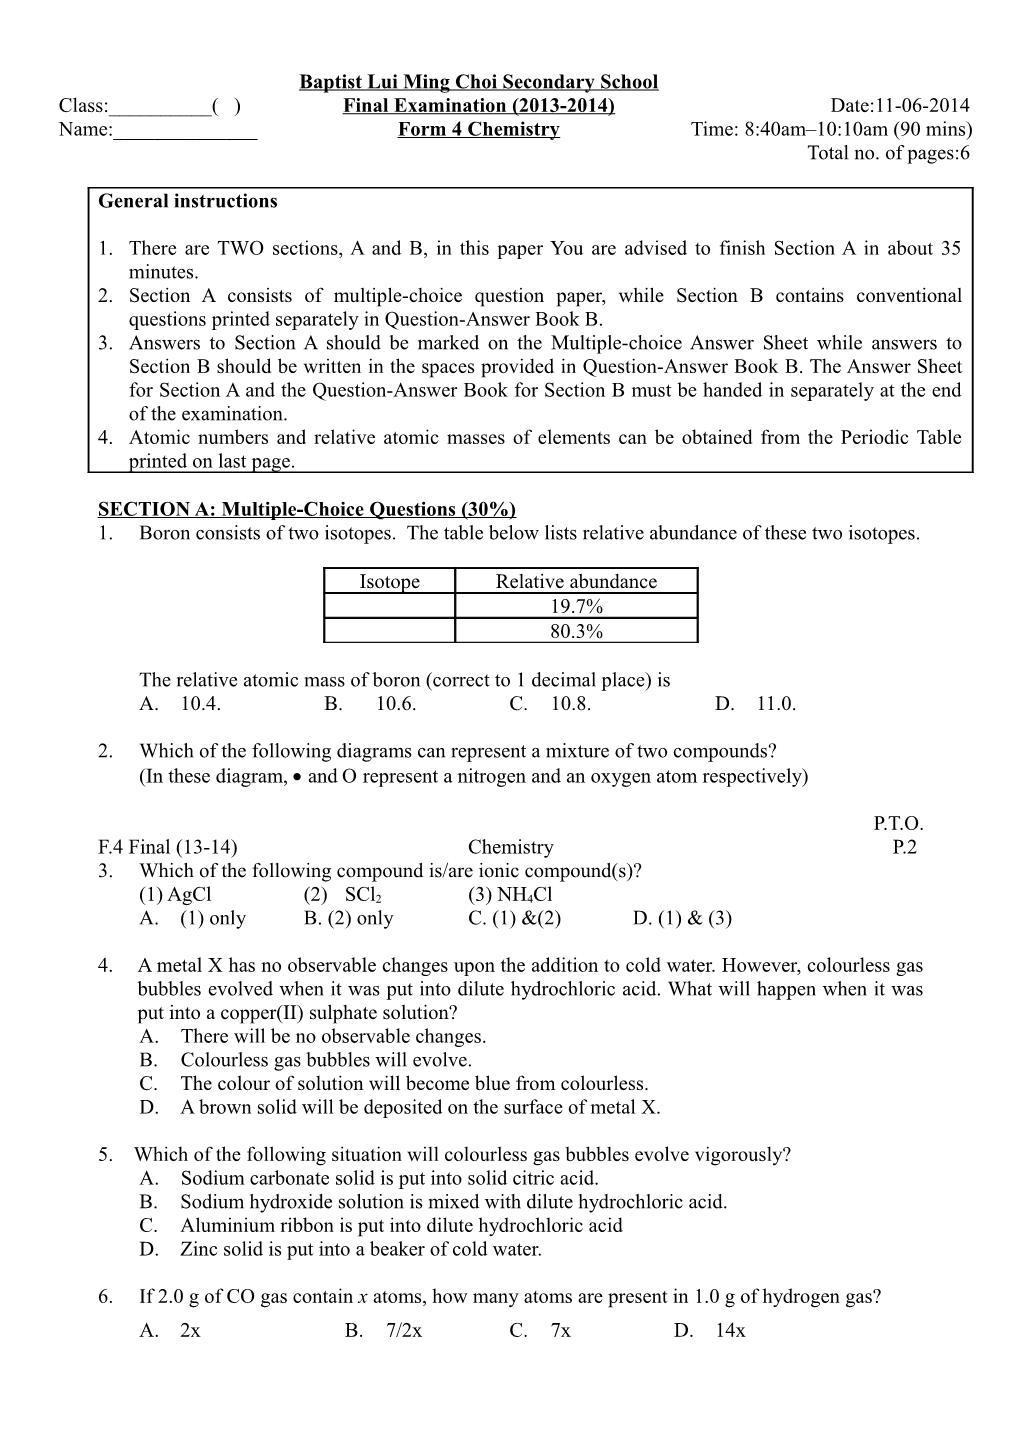 SECTION A: Multiple-Choice Questions (30%)